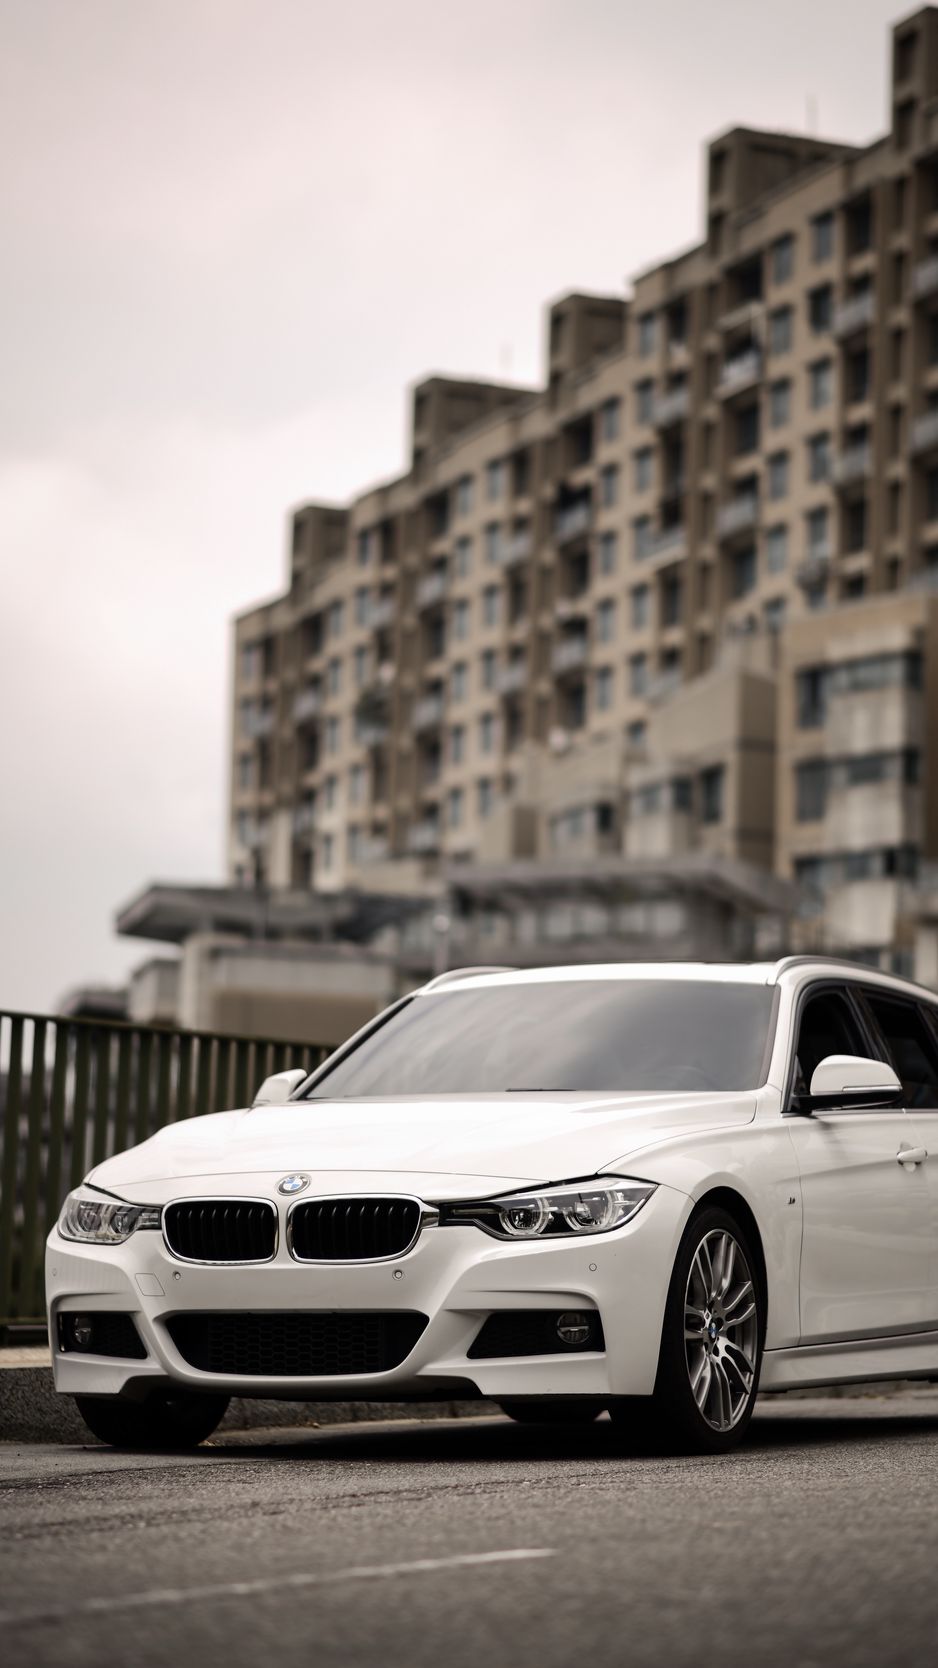 Download Wallpaper 938x1668 Bmw 320i, Bmw, Car, White, City Iphone 8 7 6s 6 For Parallax HD Background